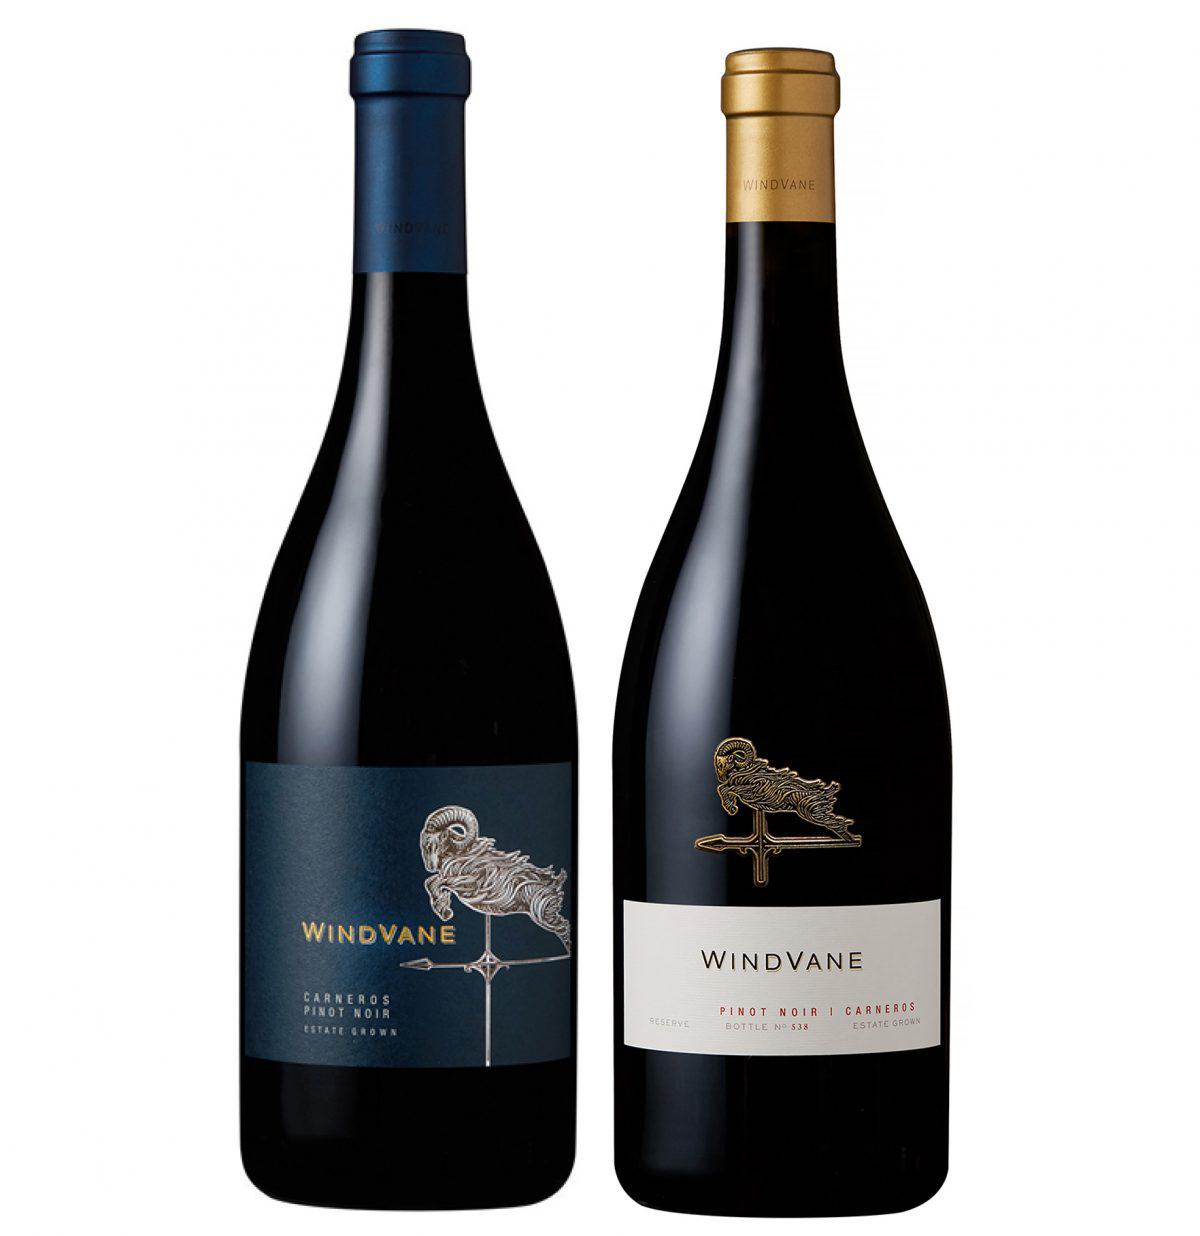 Classic Pinot Noir From Carneros, Brand New And Beautiful